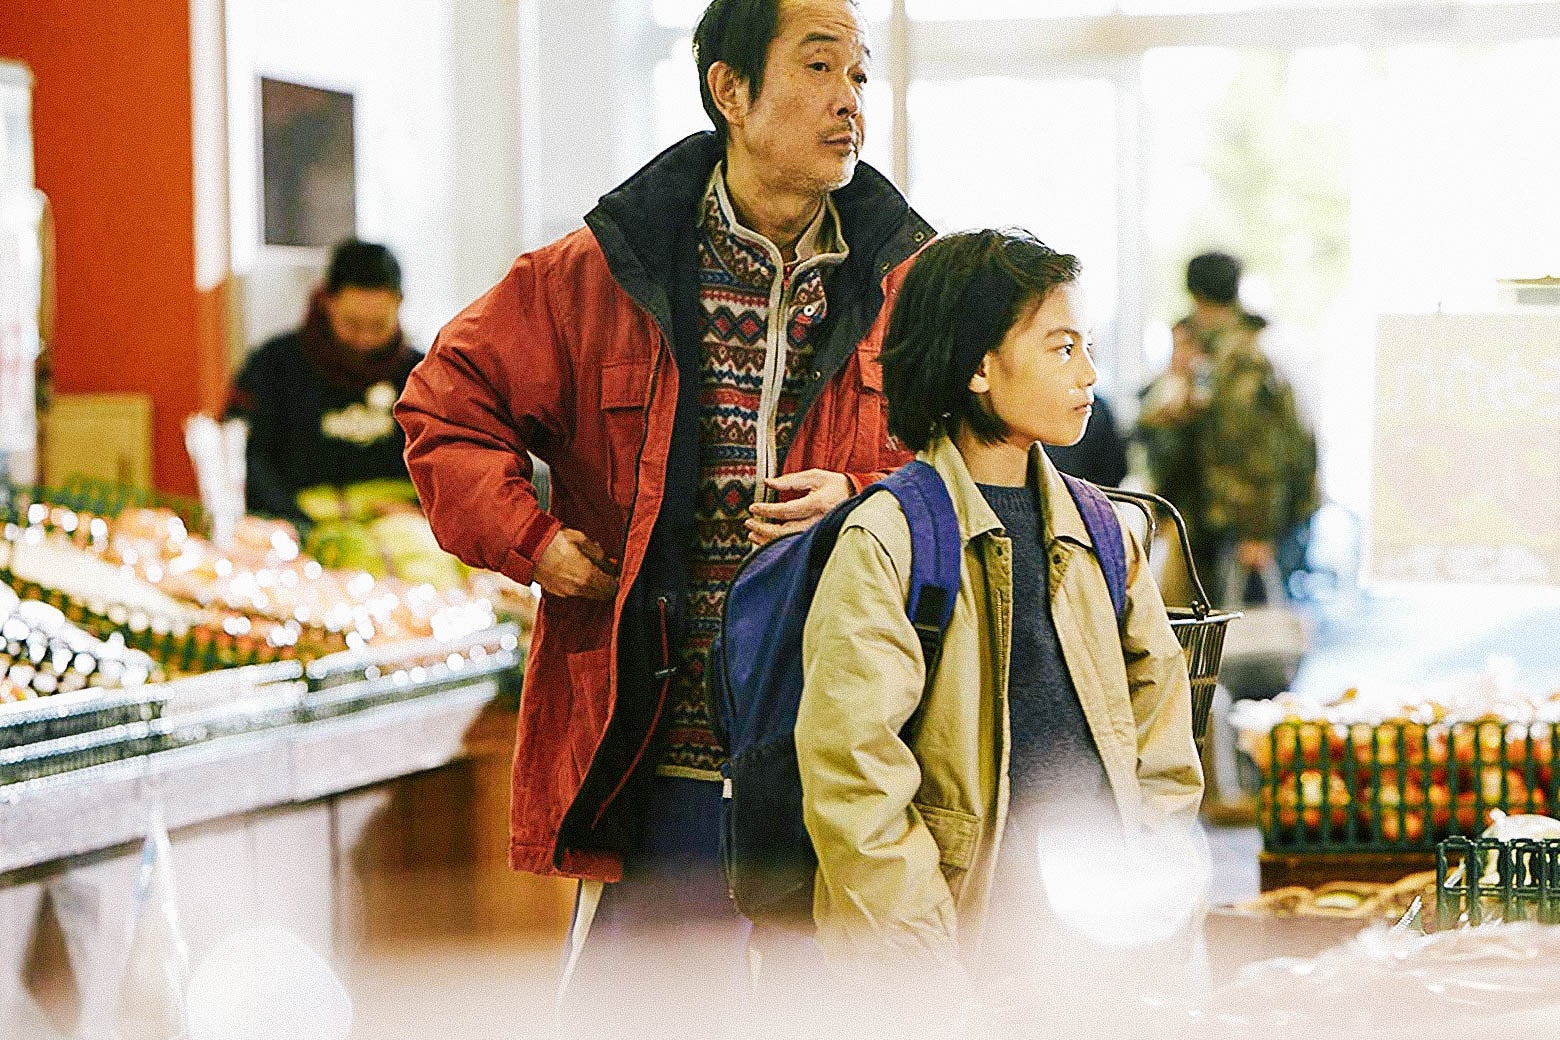 A still from Shoplifters depicts characters Osamu (Lily Franky) and Shota (Jyo Kairi) standing at a grocery store.